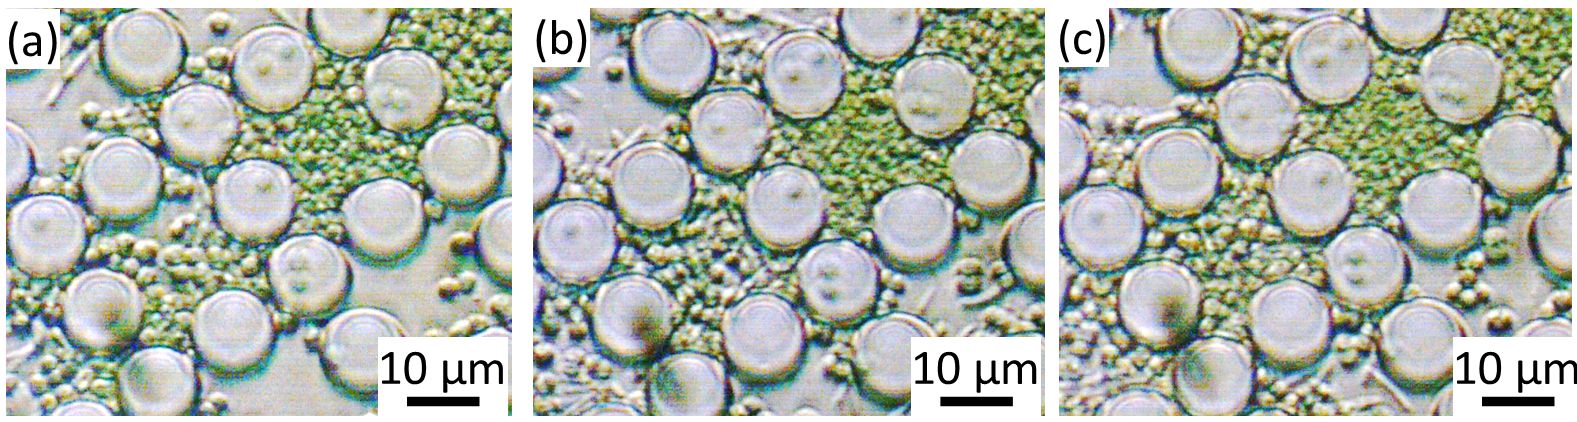 Suppression of cell division of cyanobacteria inside micro pillar arrays